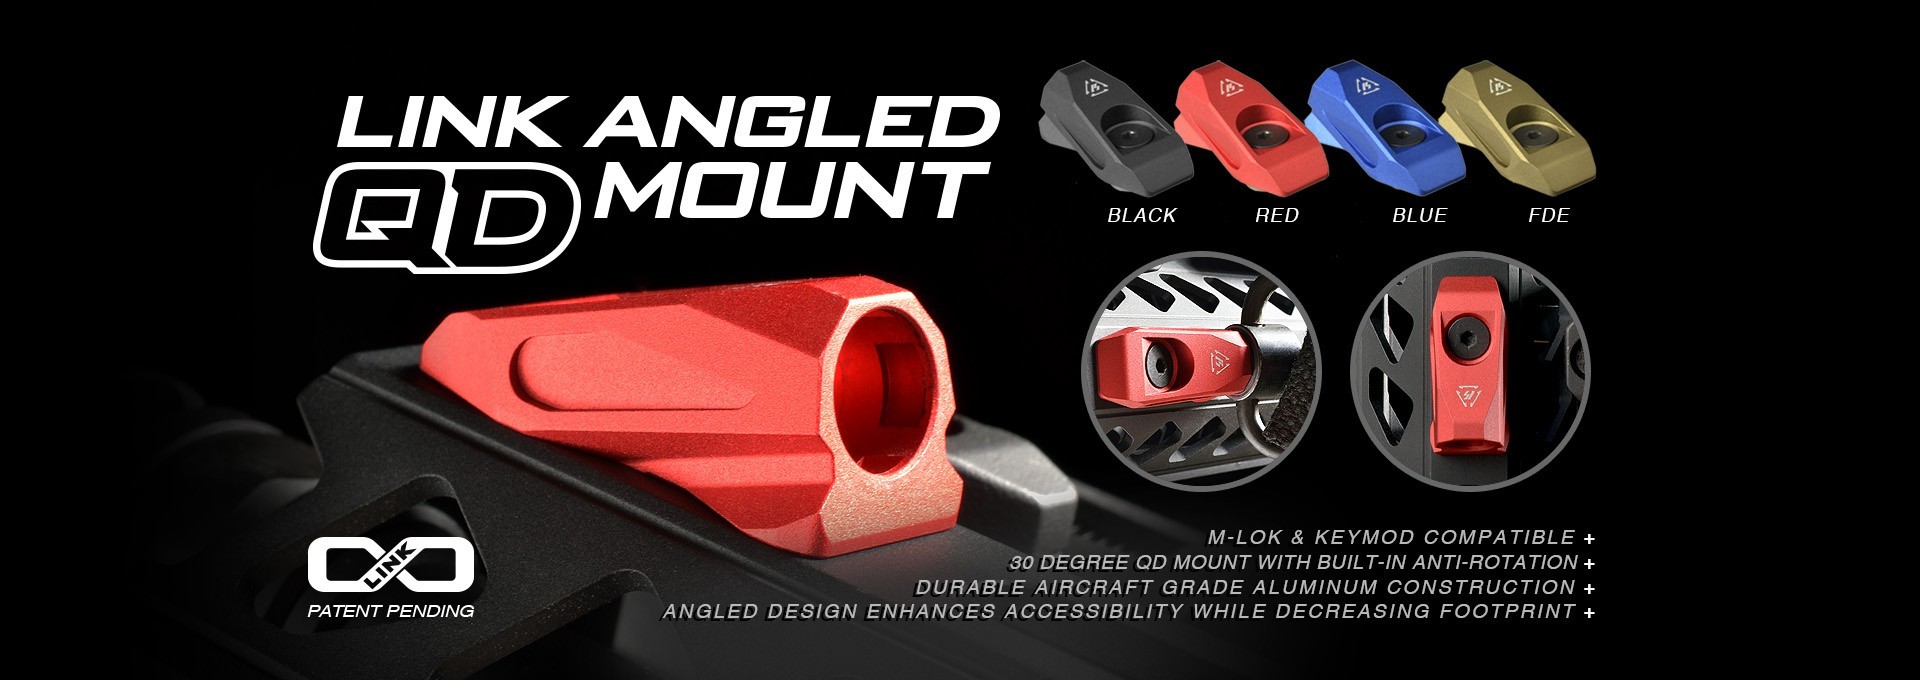 Strike Industries Link Angled QD Mount - Black | Redcon1 Tactical